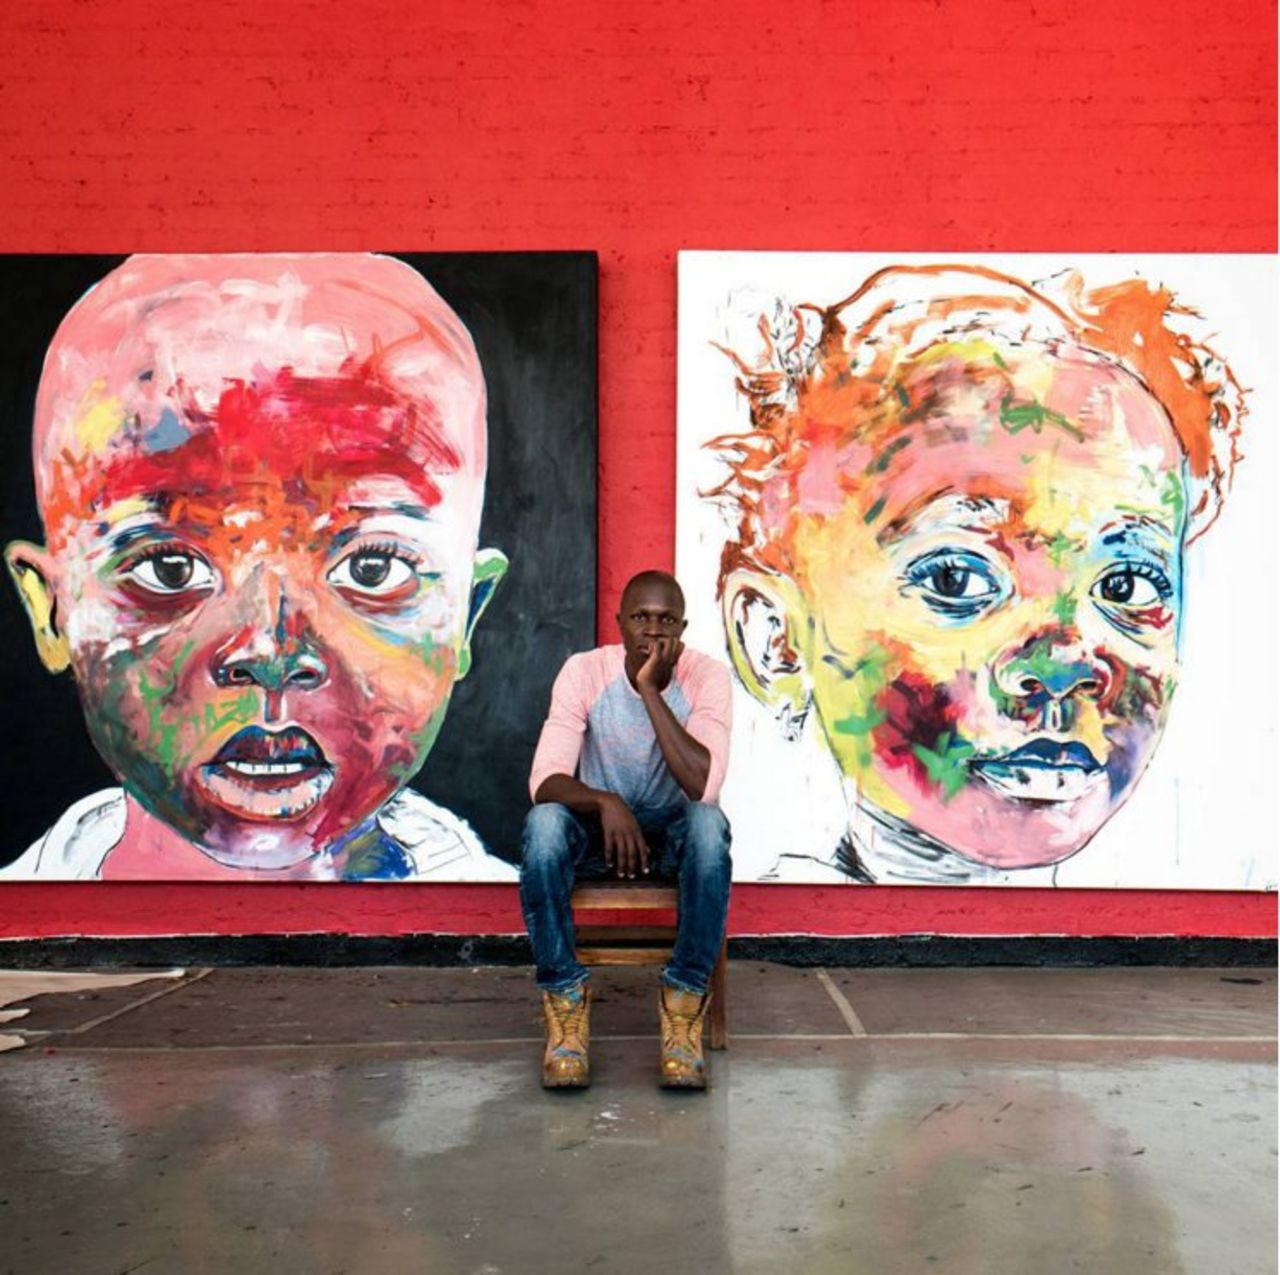 Pon has friends in artistic places, including <a href="https://www.instagram.com/nelsonmakamo/?hl=en" target="_blank" target="_blank">Nelson Makamo</a> who he describes as; "One of the most humble and amazing South African artists I've ever met. He has a heart of a gold and a deep insight into life, and with that comes many inspiring moments and great conversations." 